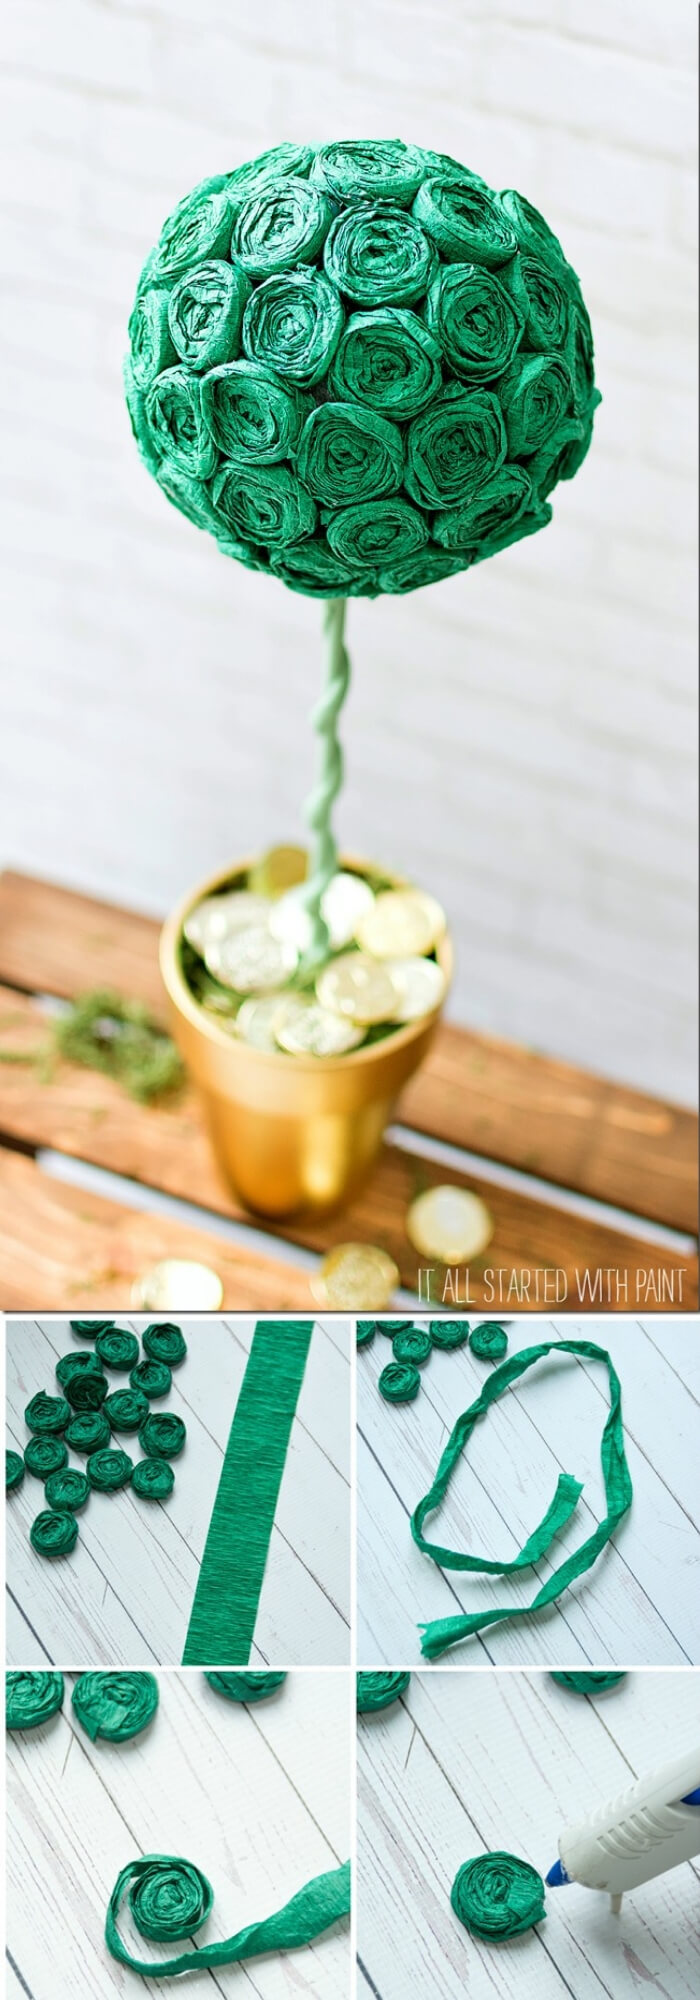 Dollar store topiary for St. Patrick's Day | Creative St. Patrick’s Day Decor Ideas